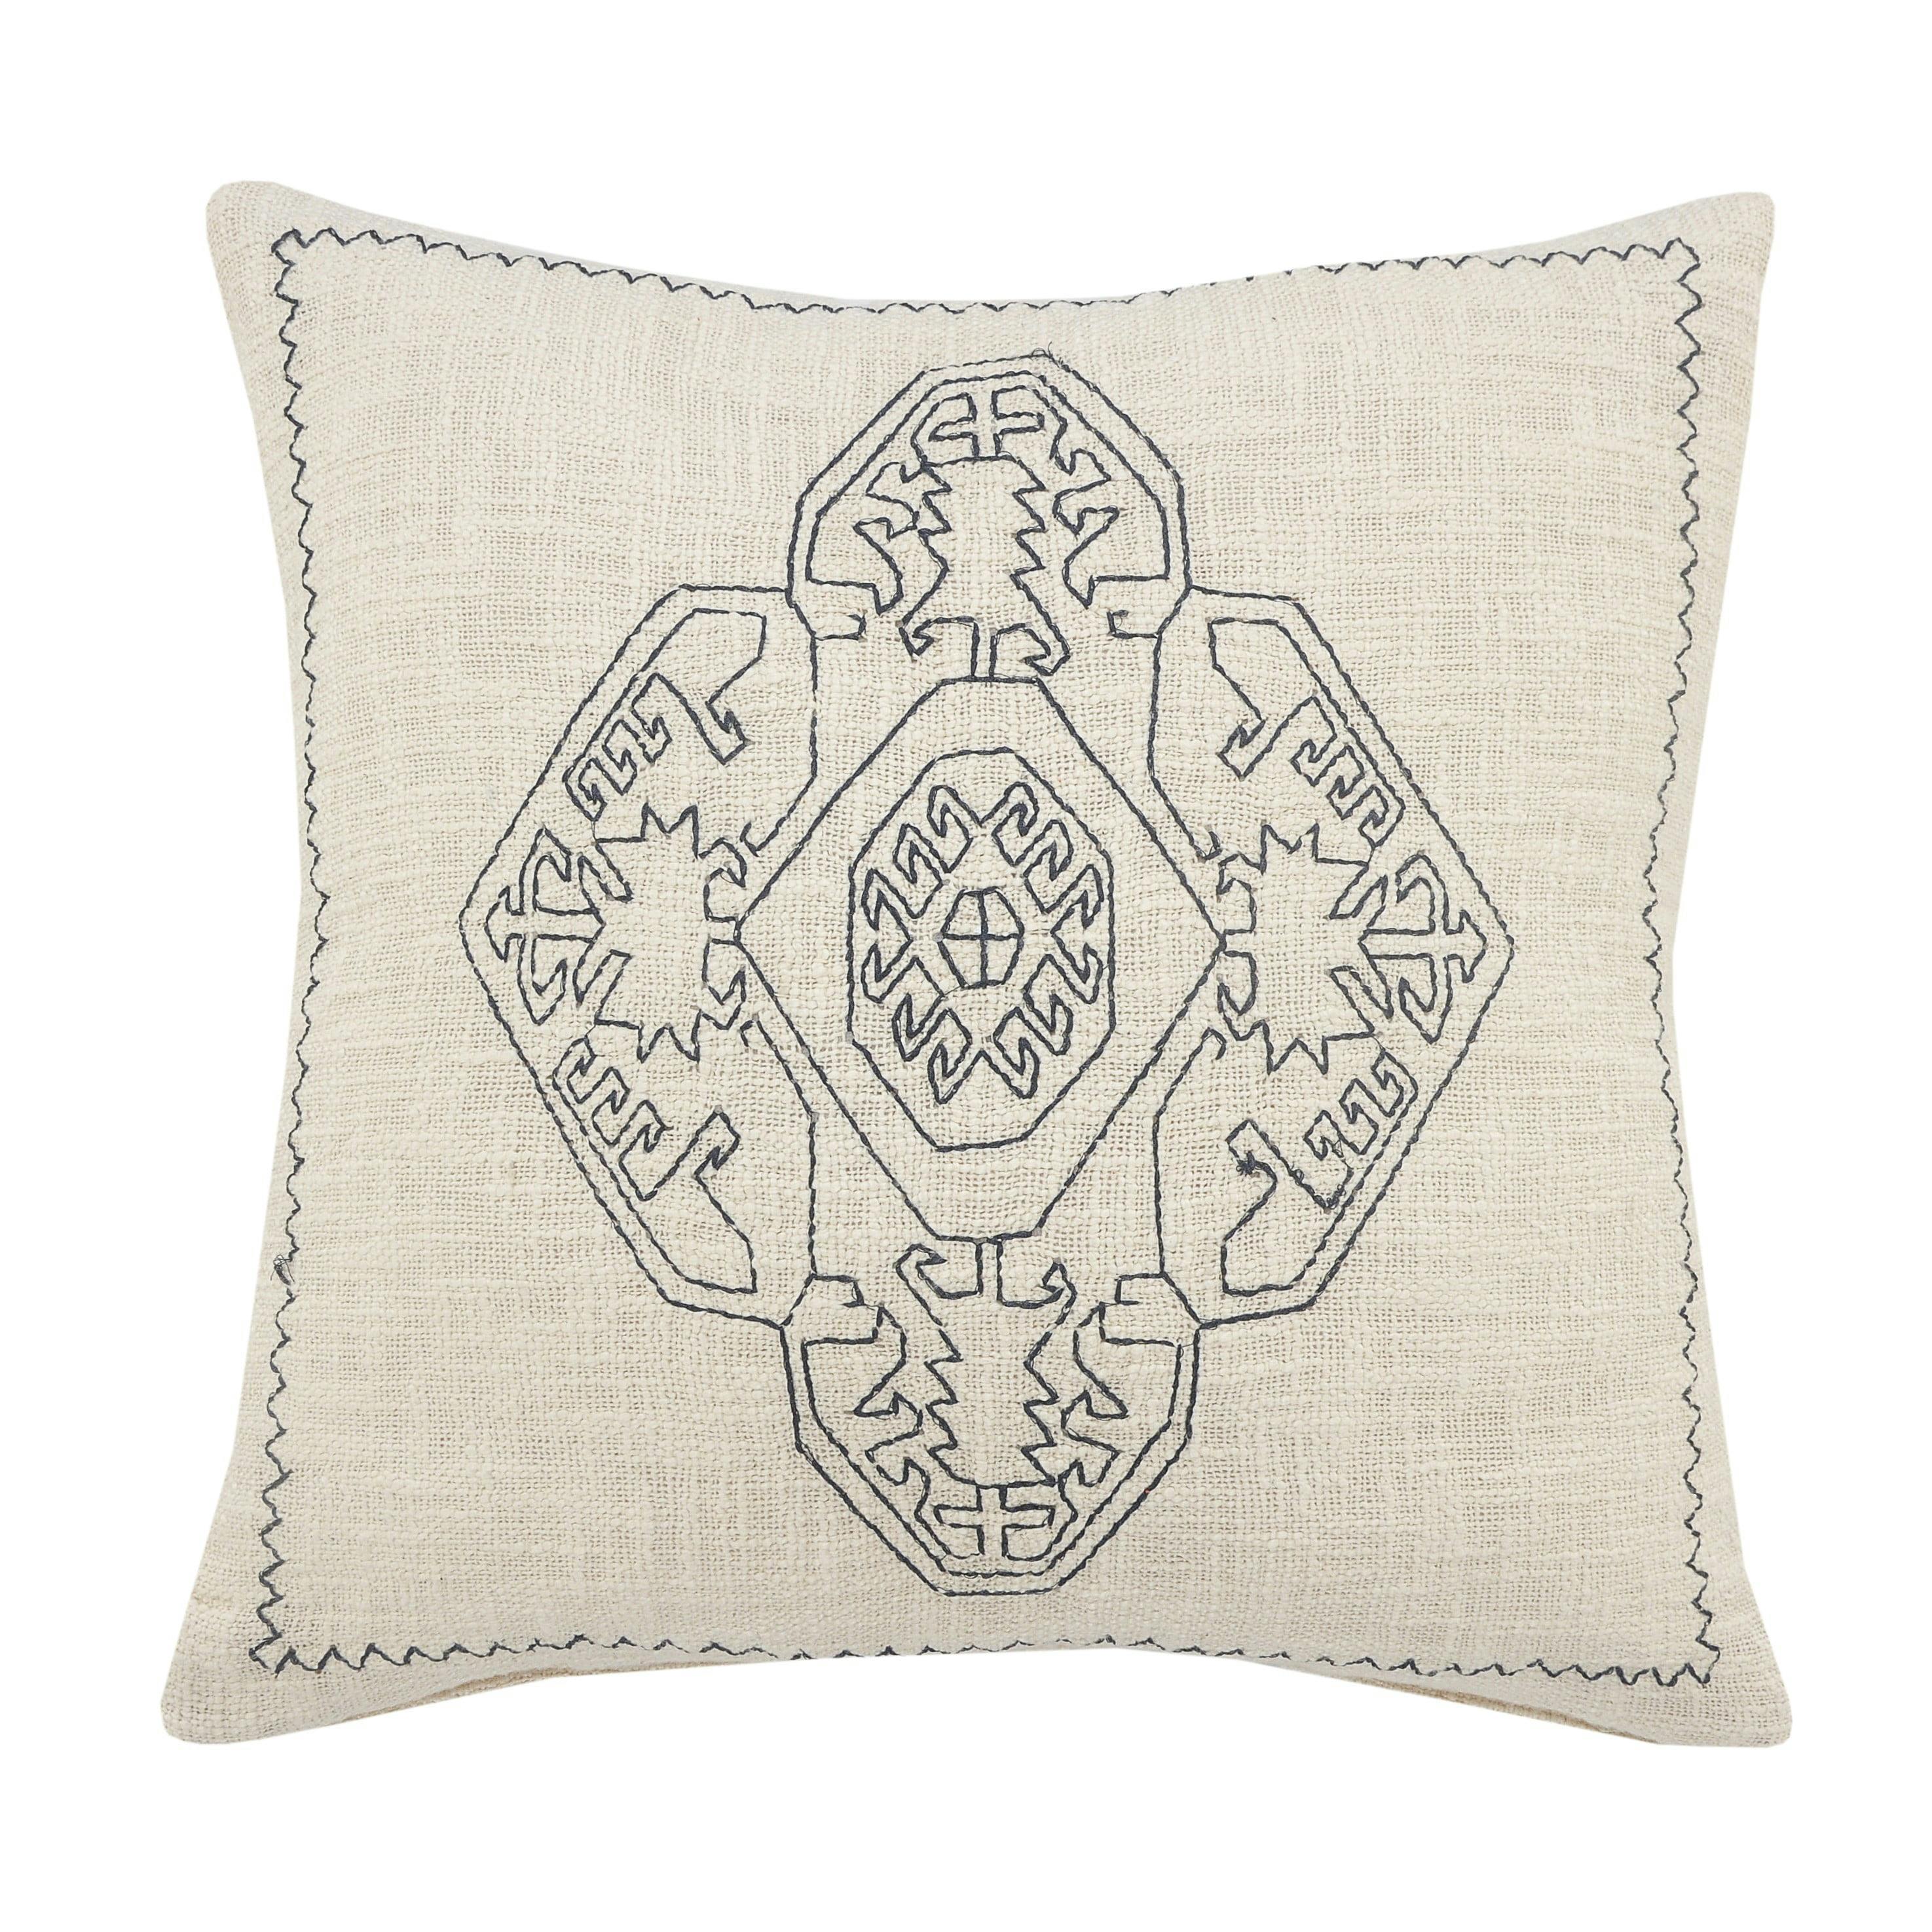 20" Square Off-White Embroidered Damask Medallion Throw Pillow Set